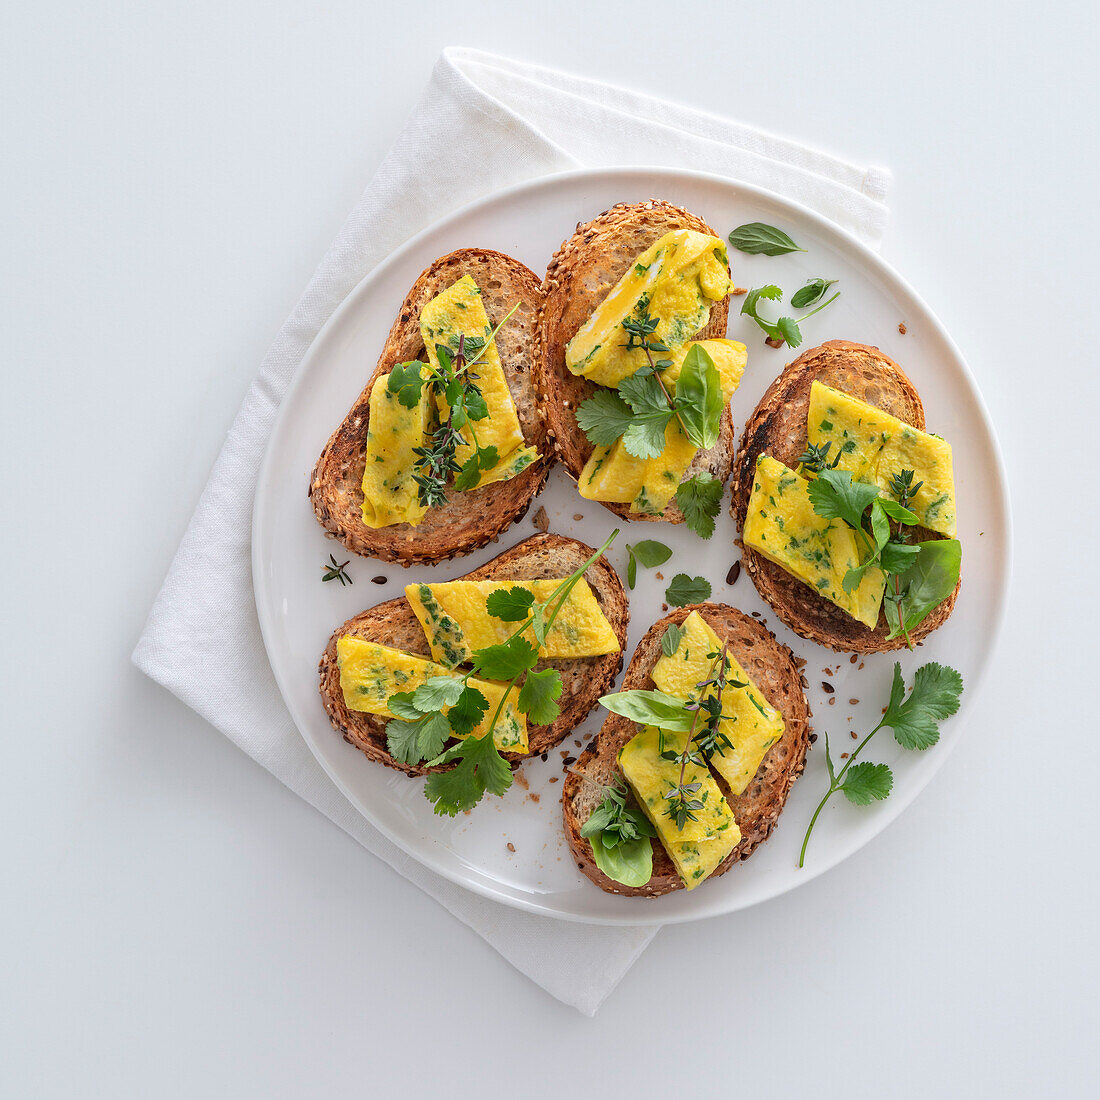 Crostini with omelet and herbs